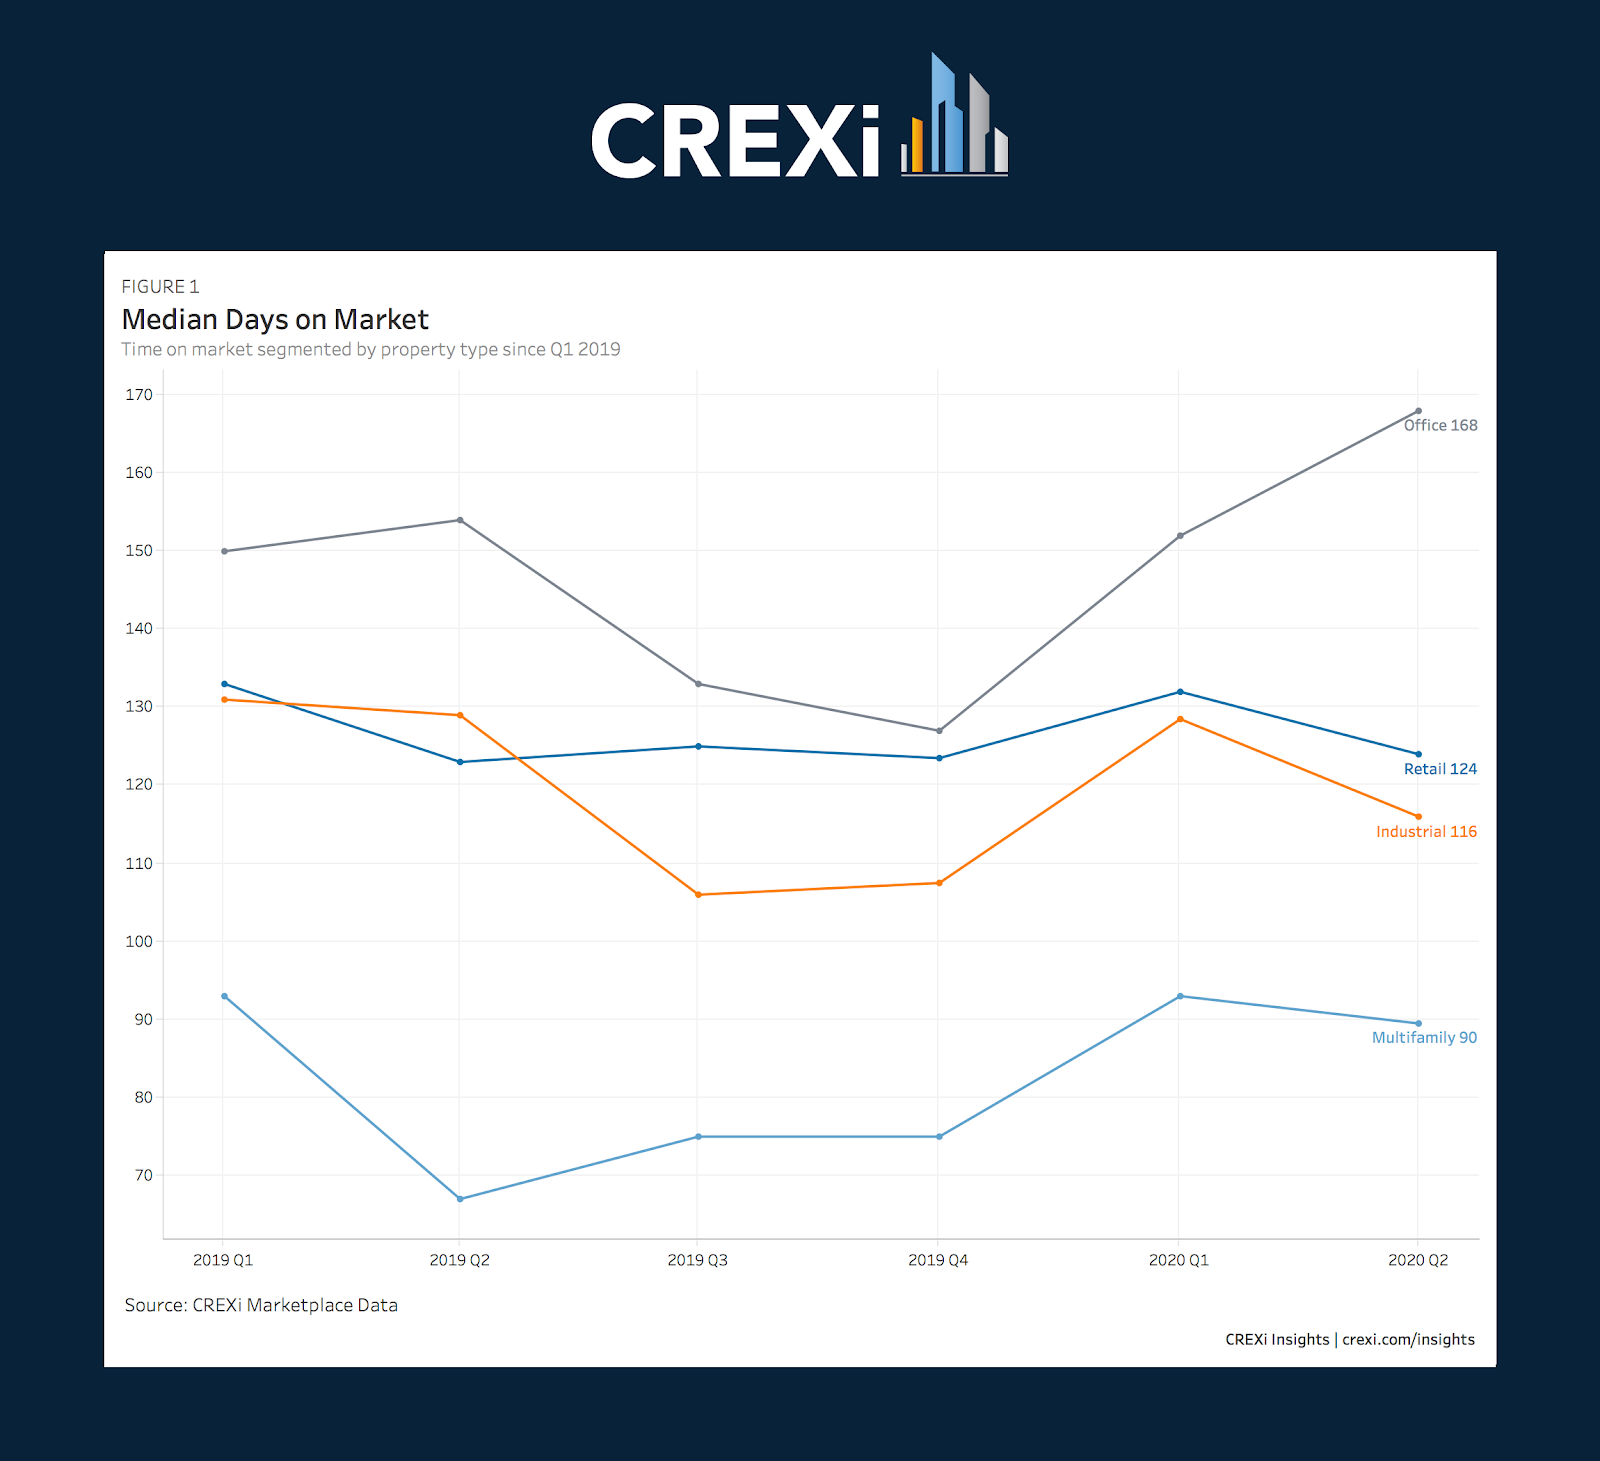 Graph of CREXi data on Median Days on Market, showing data on Office, retail, and industrial properties